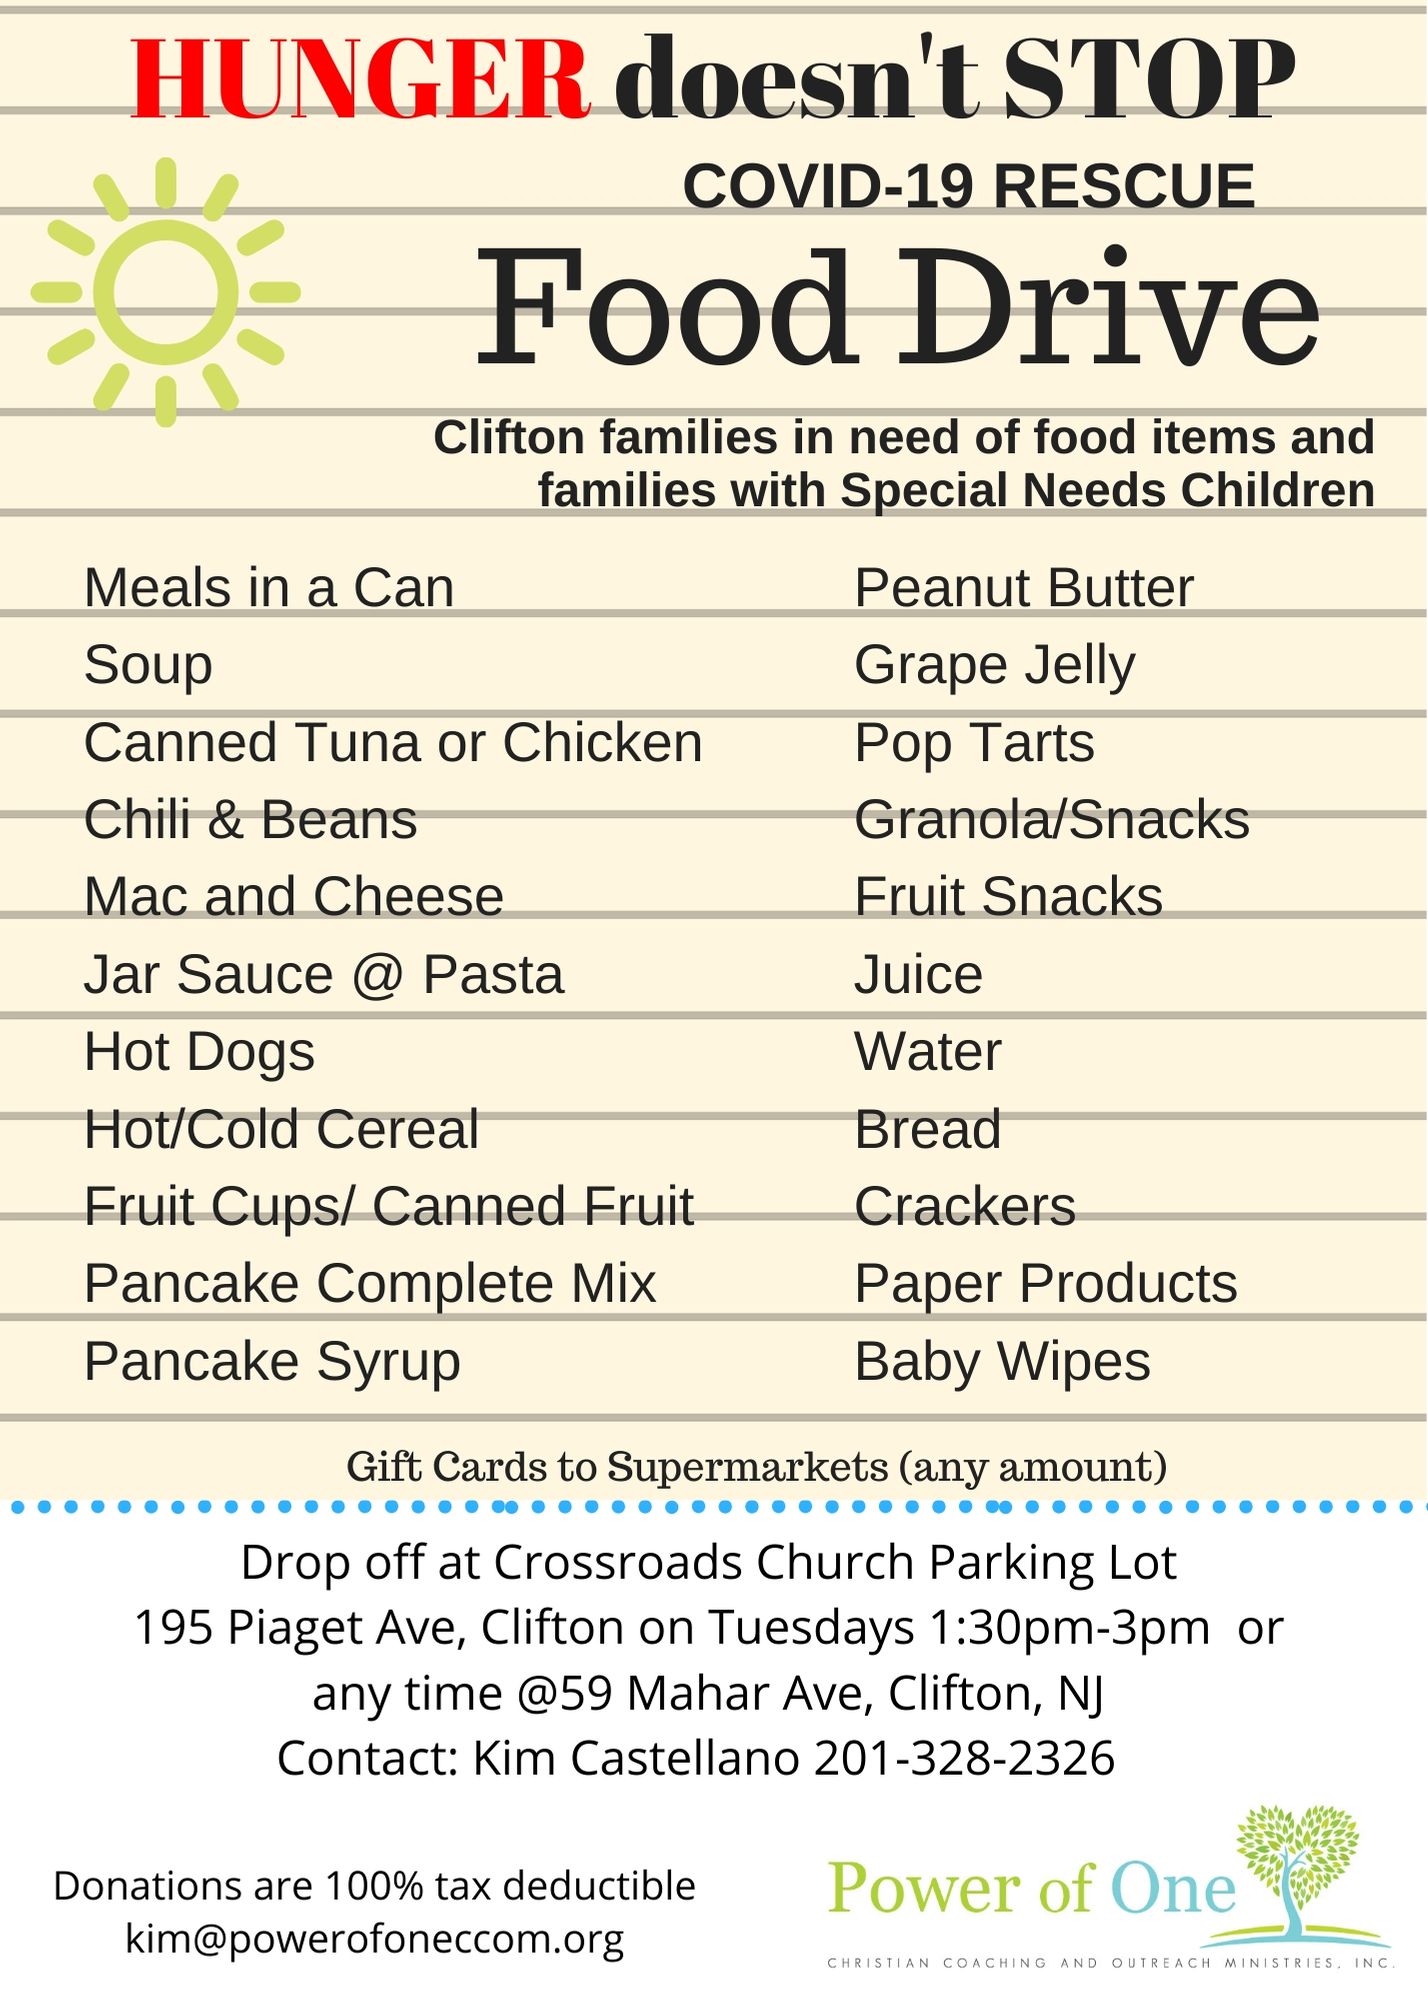 Food Drive – Covid-19 Rescue - Power Of One CCOM